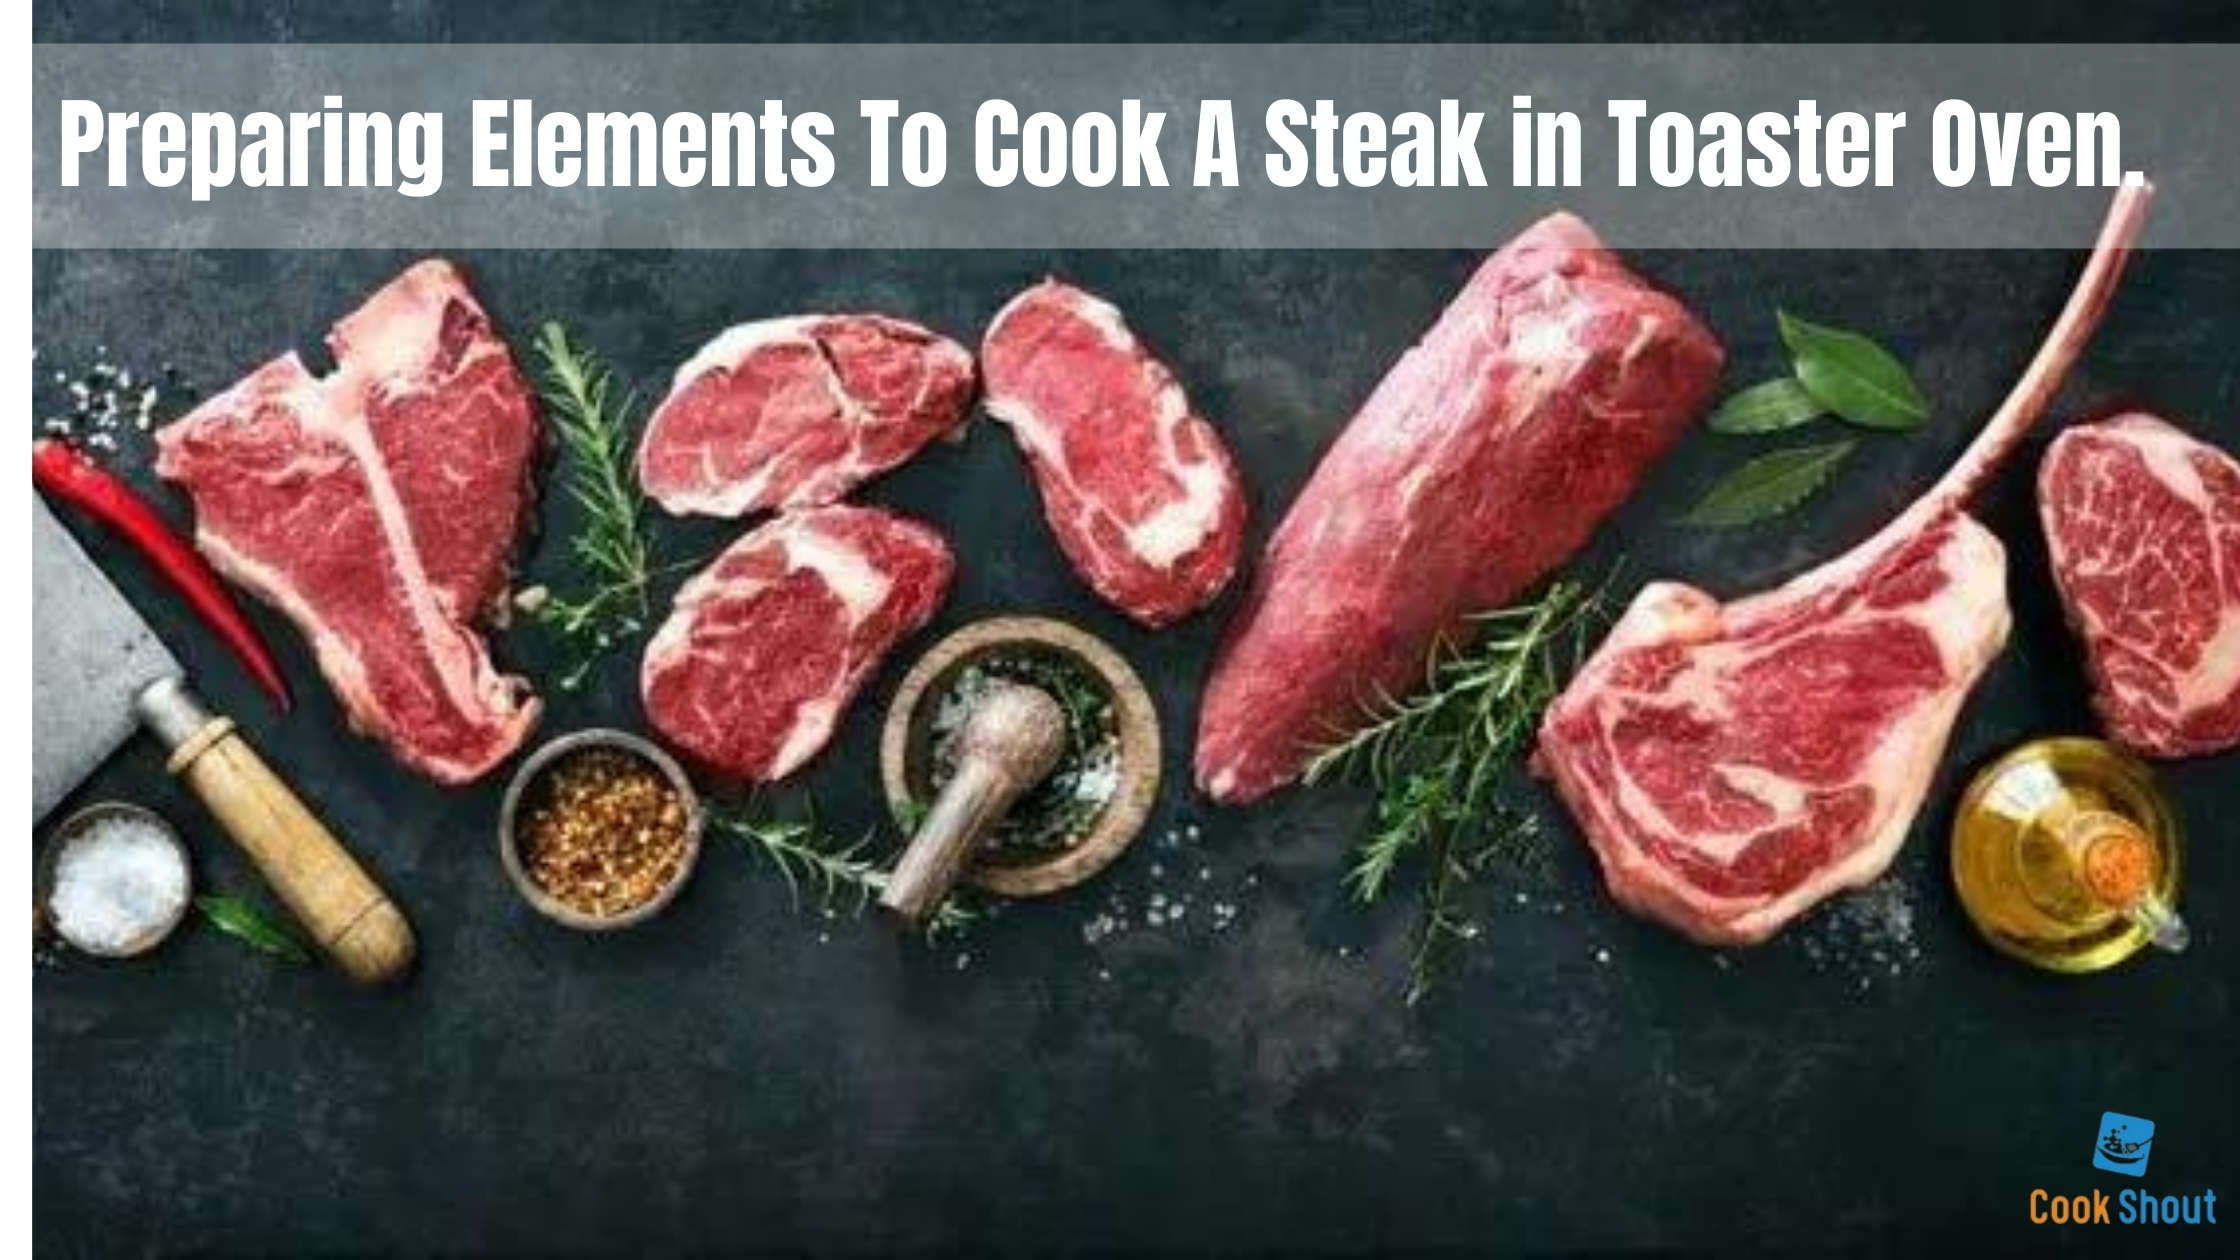 Preparing Elements To Cook A Steak in Toaster Oven.